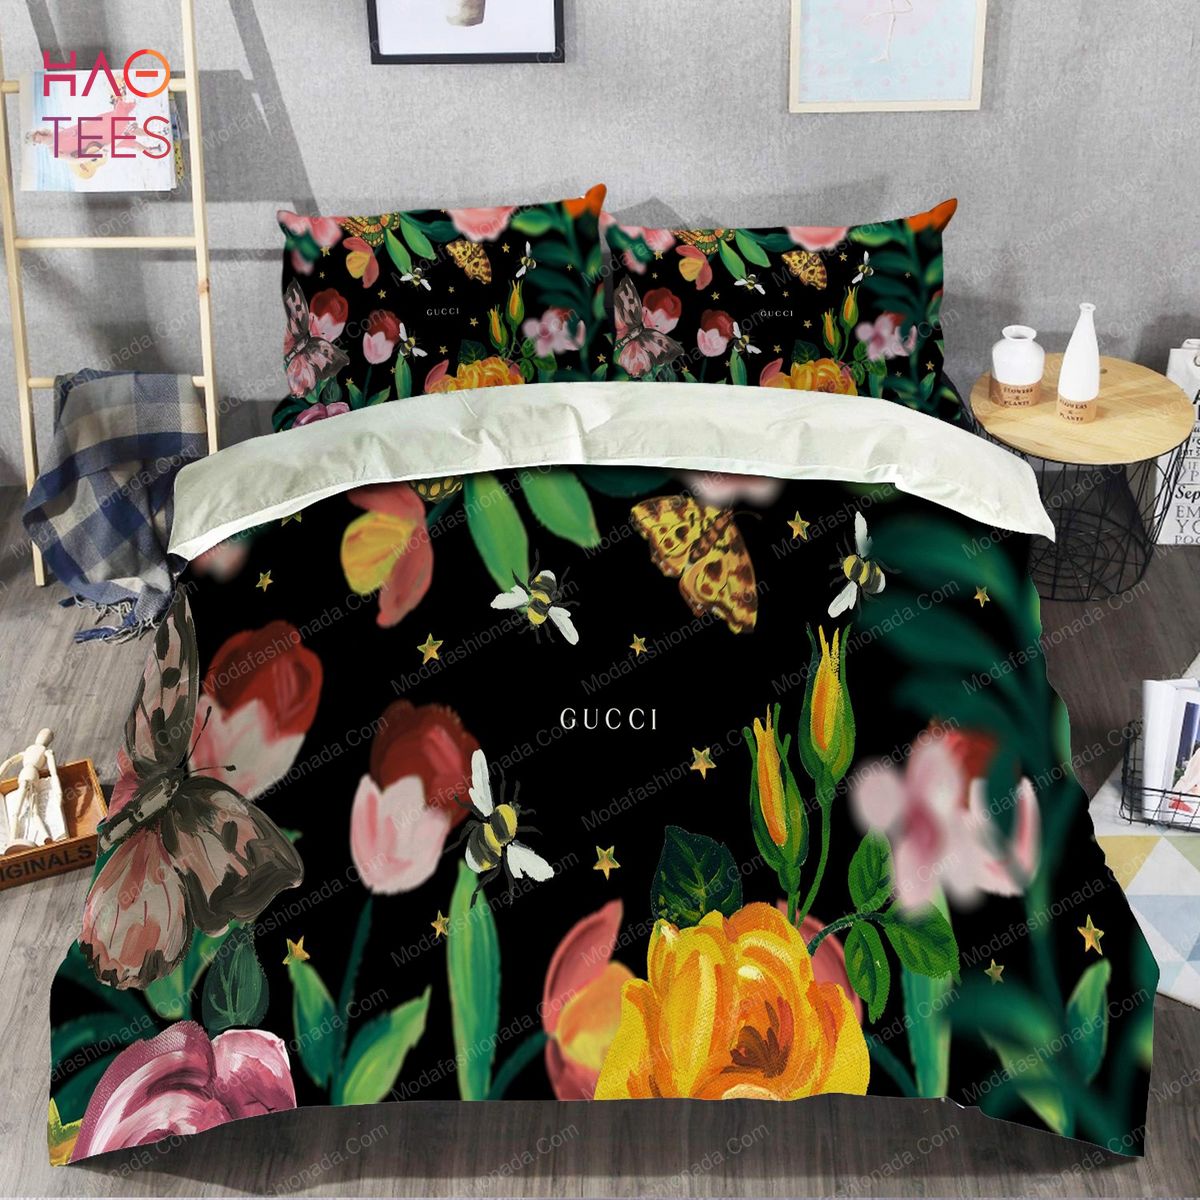 Gucci Word Surrounded By Butterfly And Flowers Brands Bedding Set